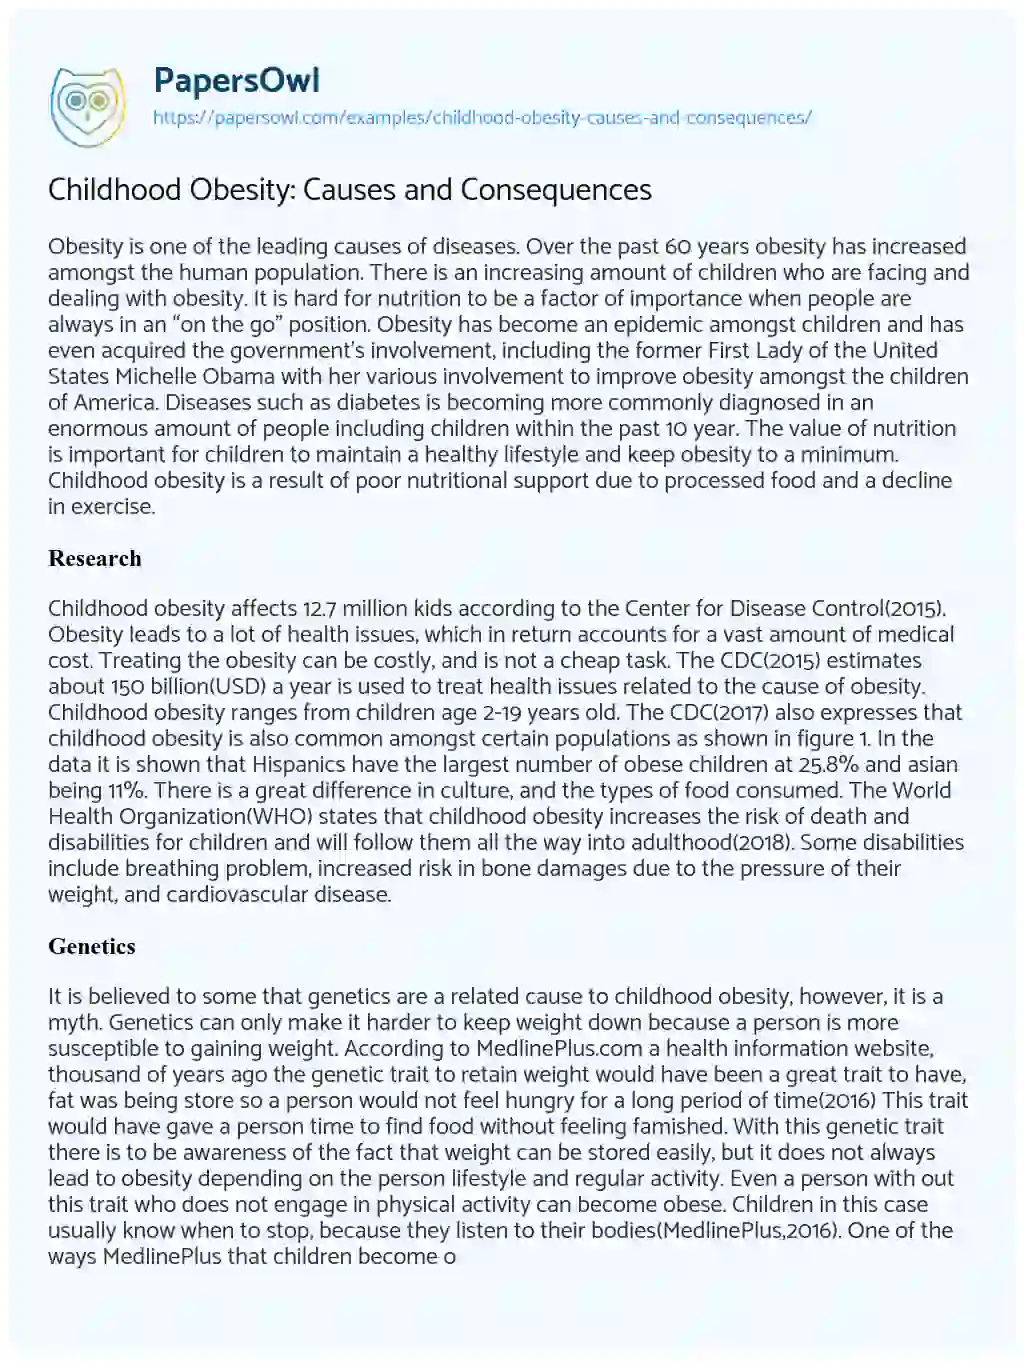 Childhood Obesity: Causes and Consequences essay